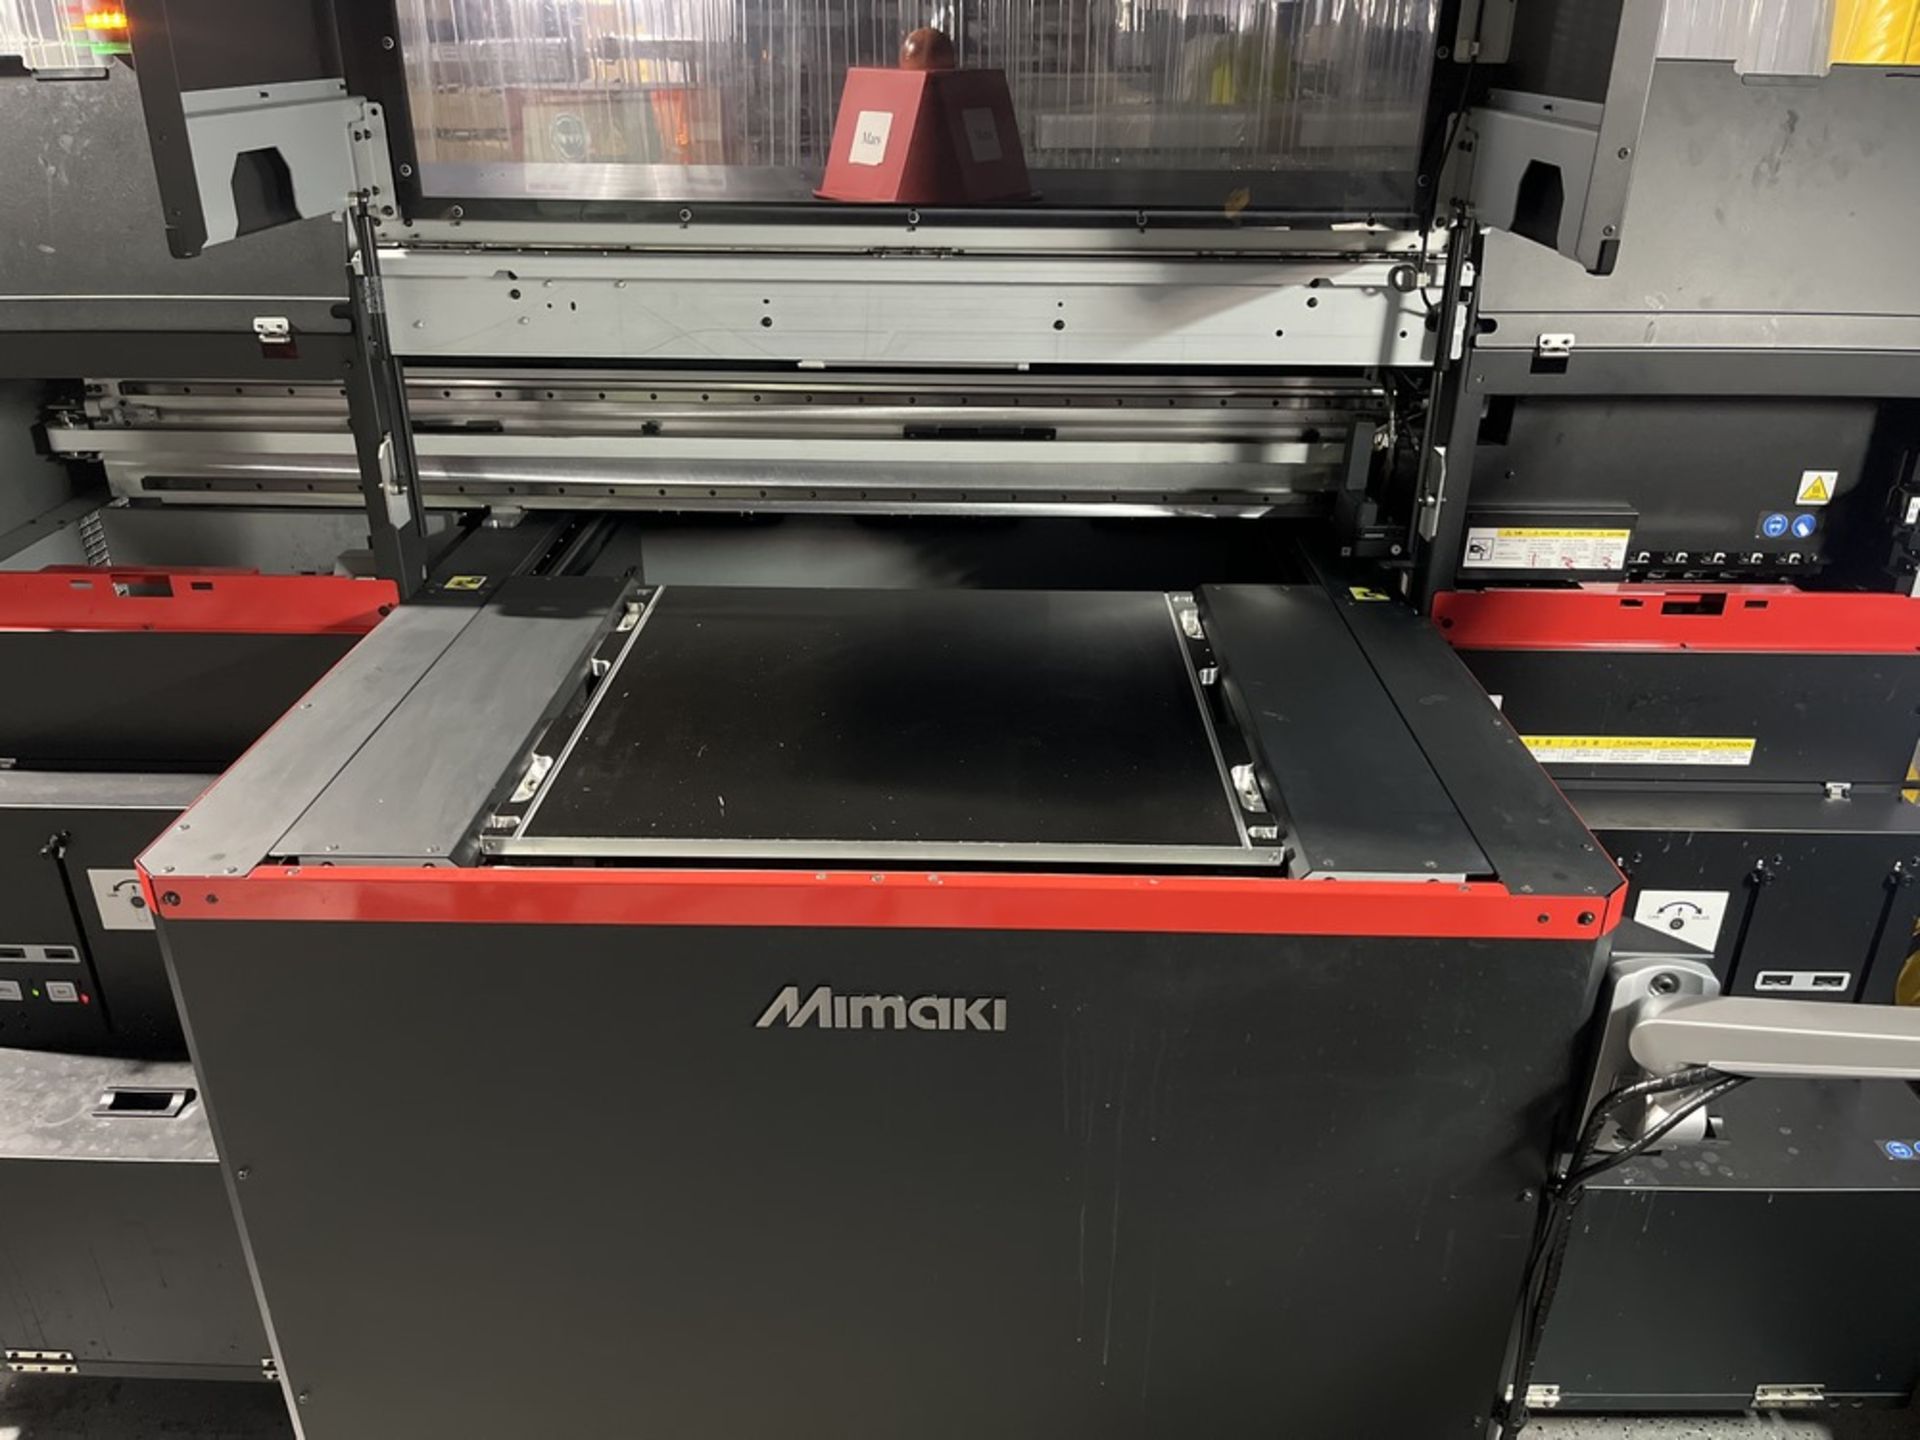 2020 Mimaki 3DUJ-553, 28,342 hours, per seller fully serviced March 1st, 2024 - Image 4 of 8